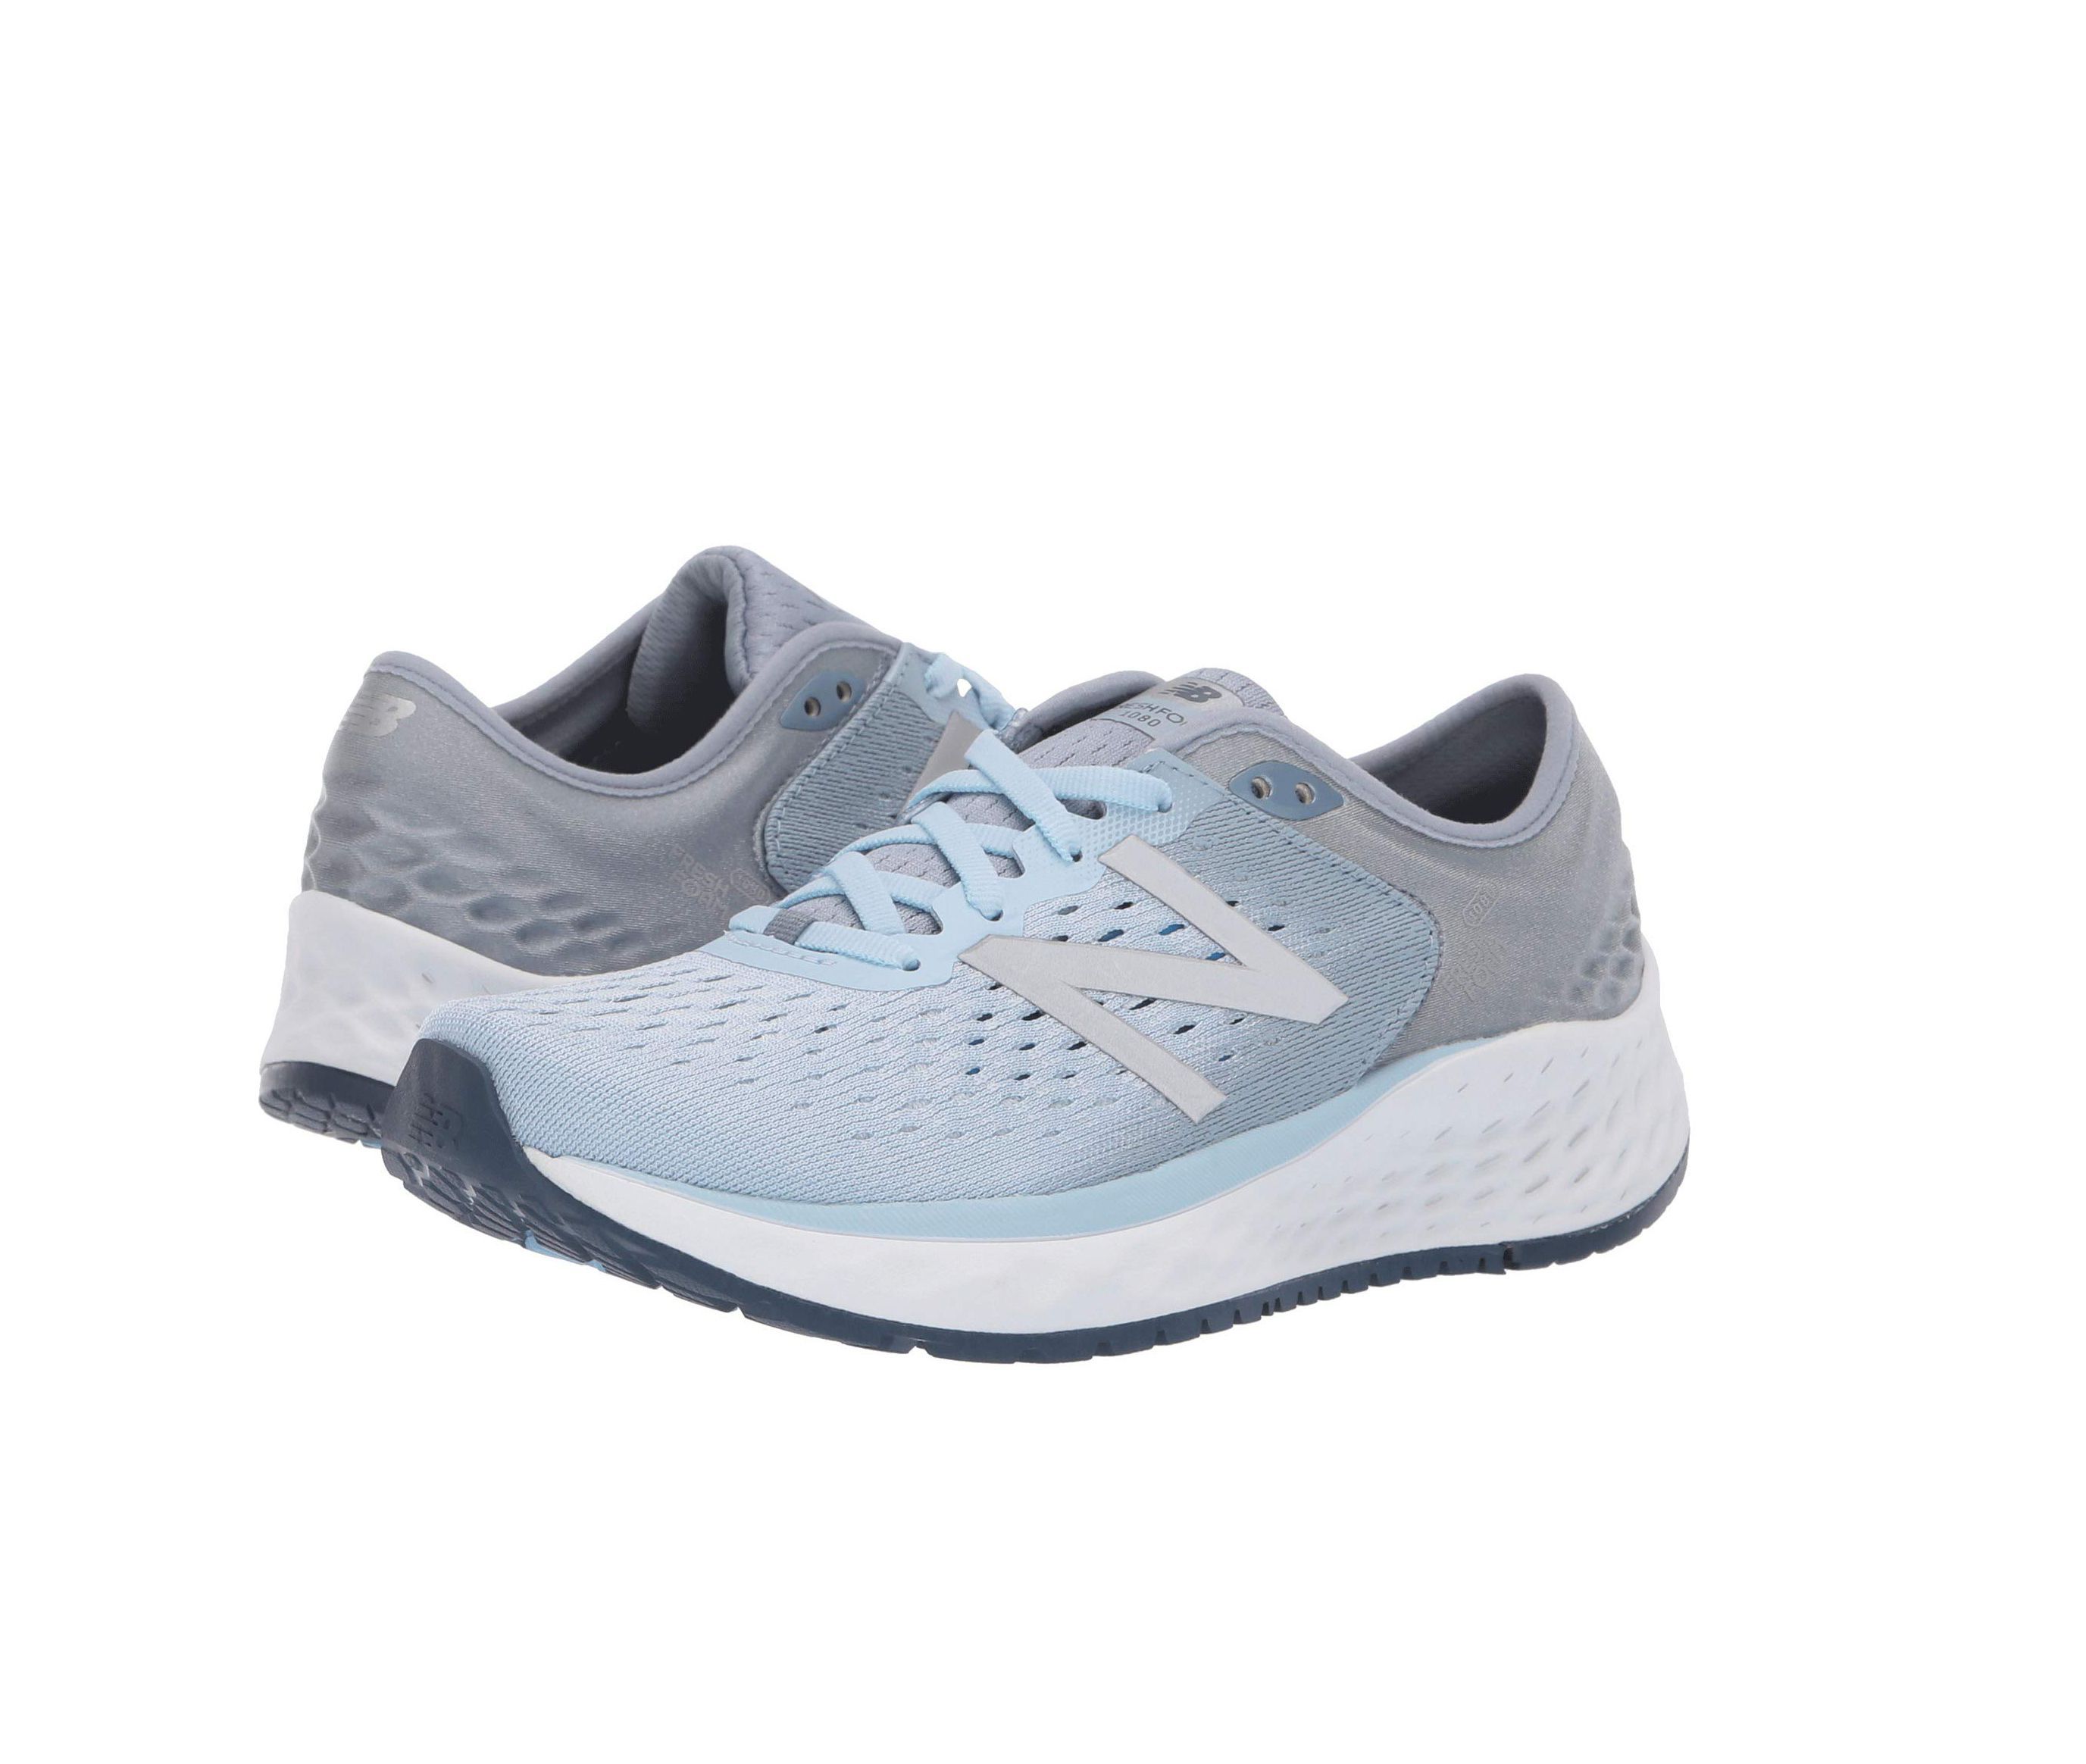 new balance women's wide athletic shoes